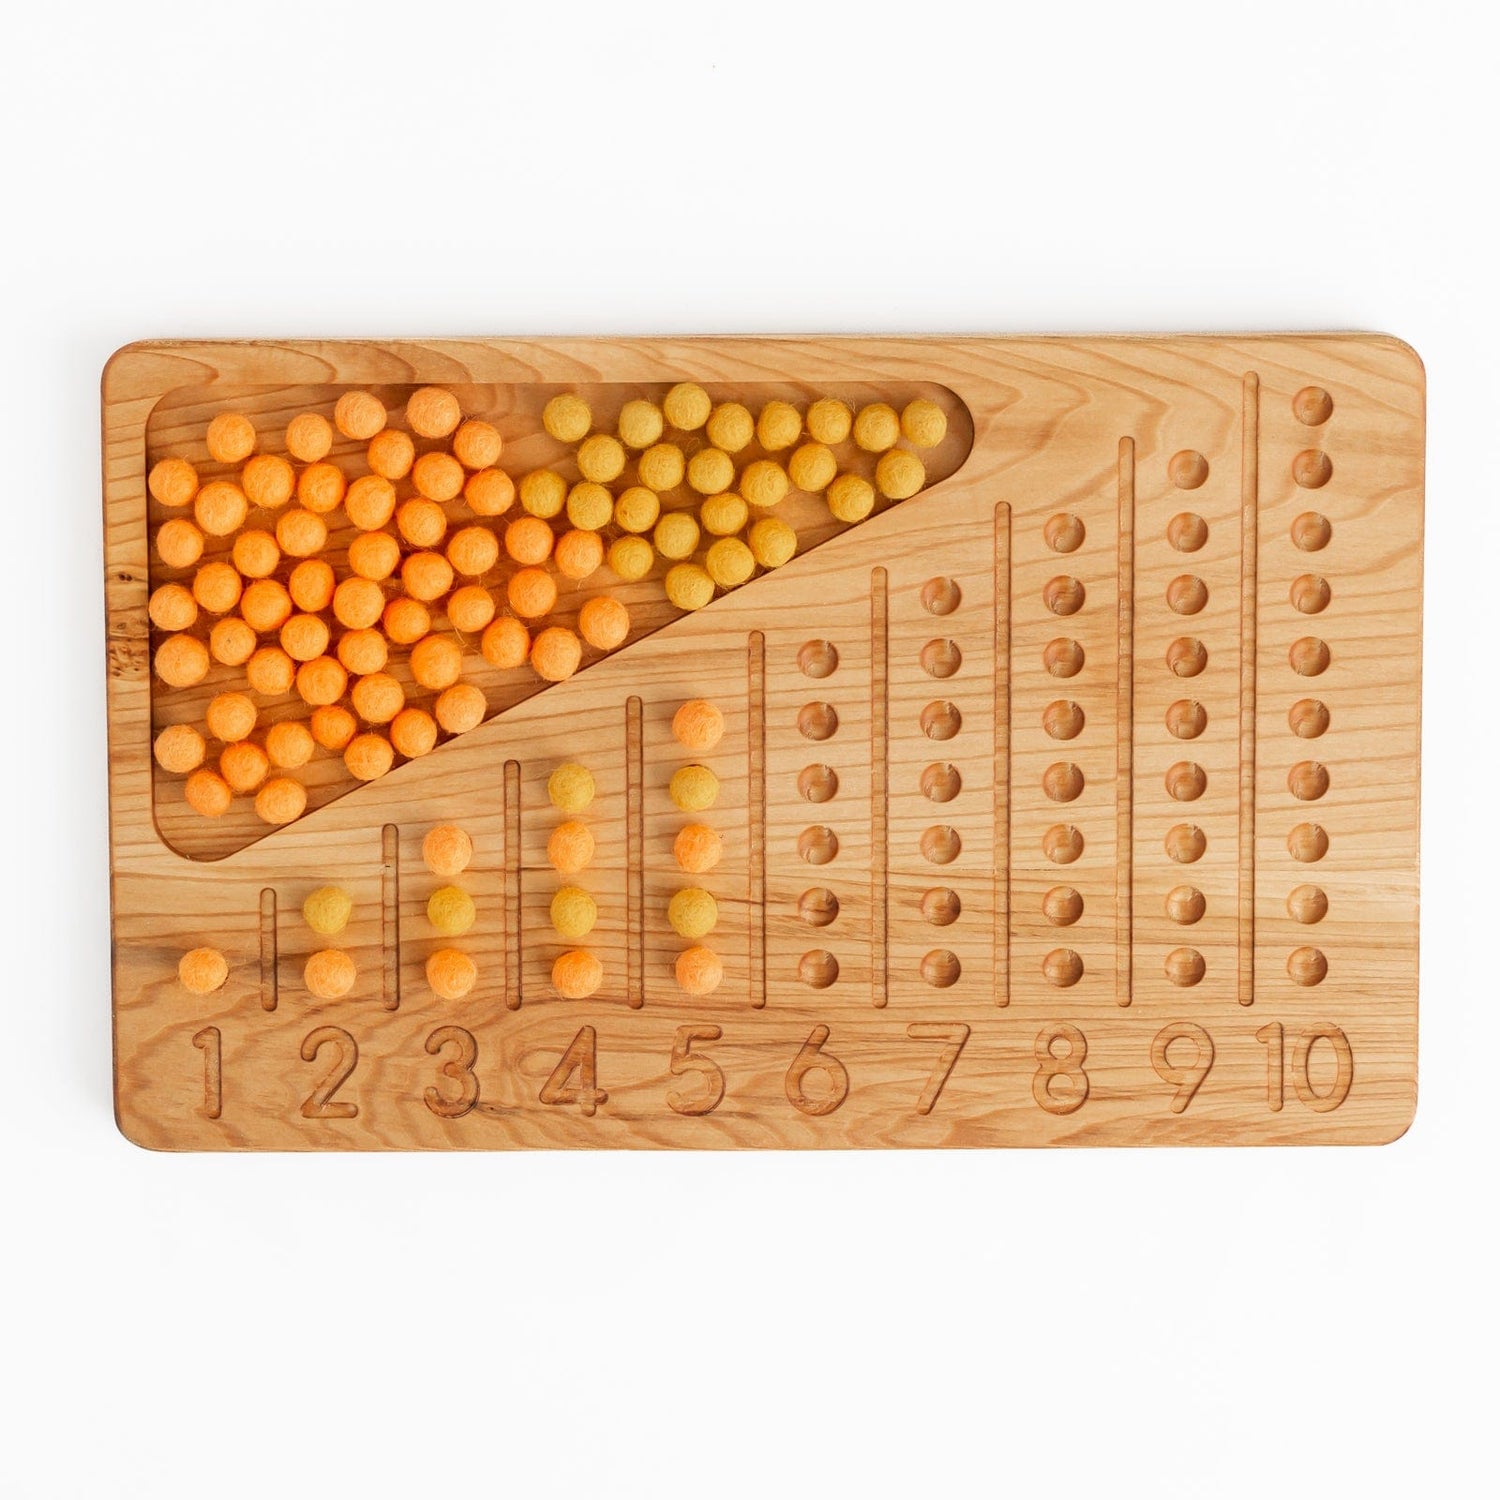 Oyuncak House Educational Wooden Counting Abacus Tray